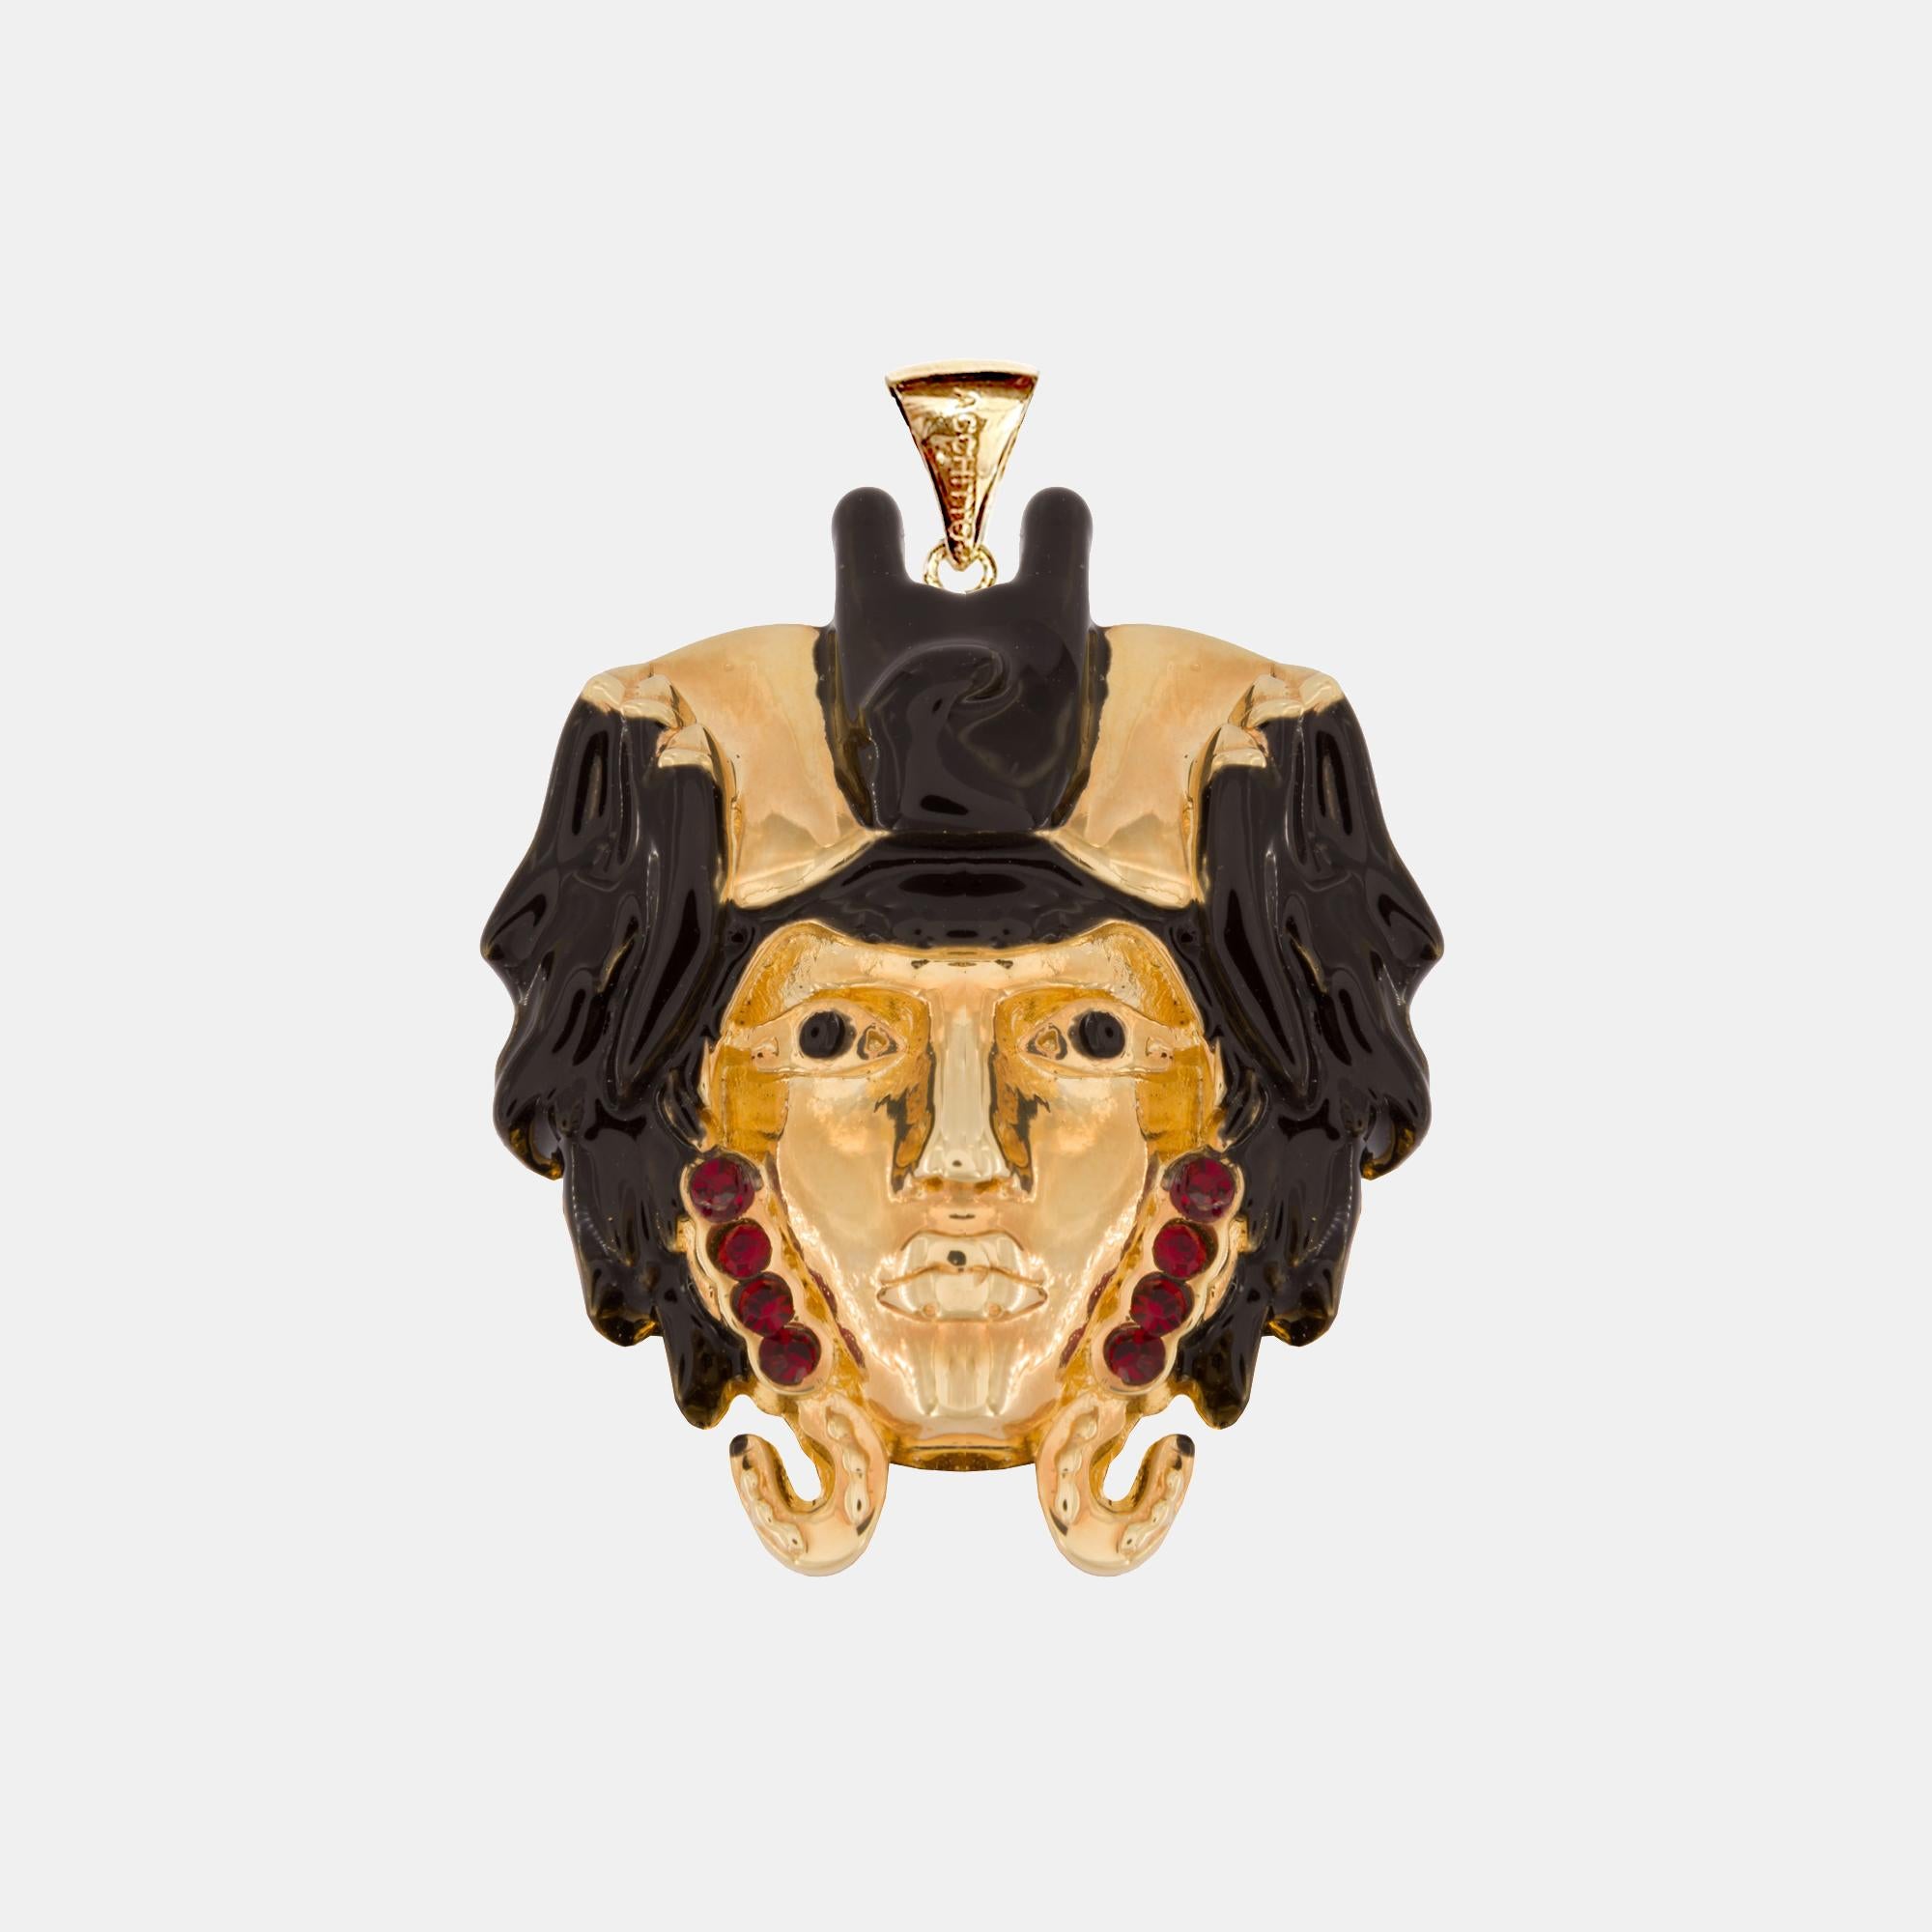 The Moro Fortunato Black Iconic Pendant made of 18K gold plated brass and embellished with Swarovski crystals and colored enamels, can be worn in different ways: it can be matched with Acchitto Stilla drop earrings, Acchitto Aurea necklaces, but